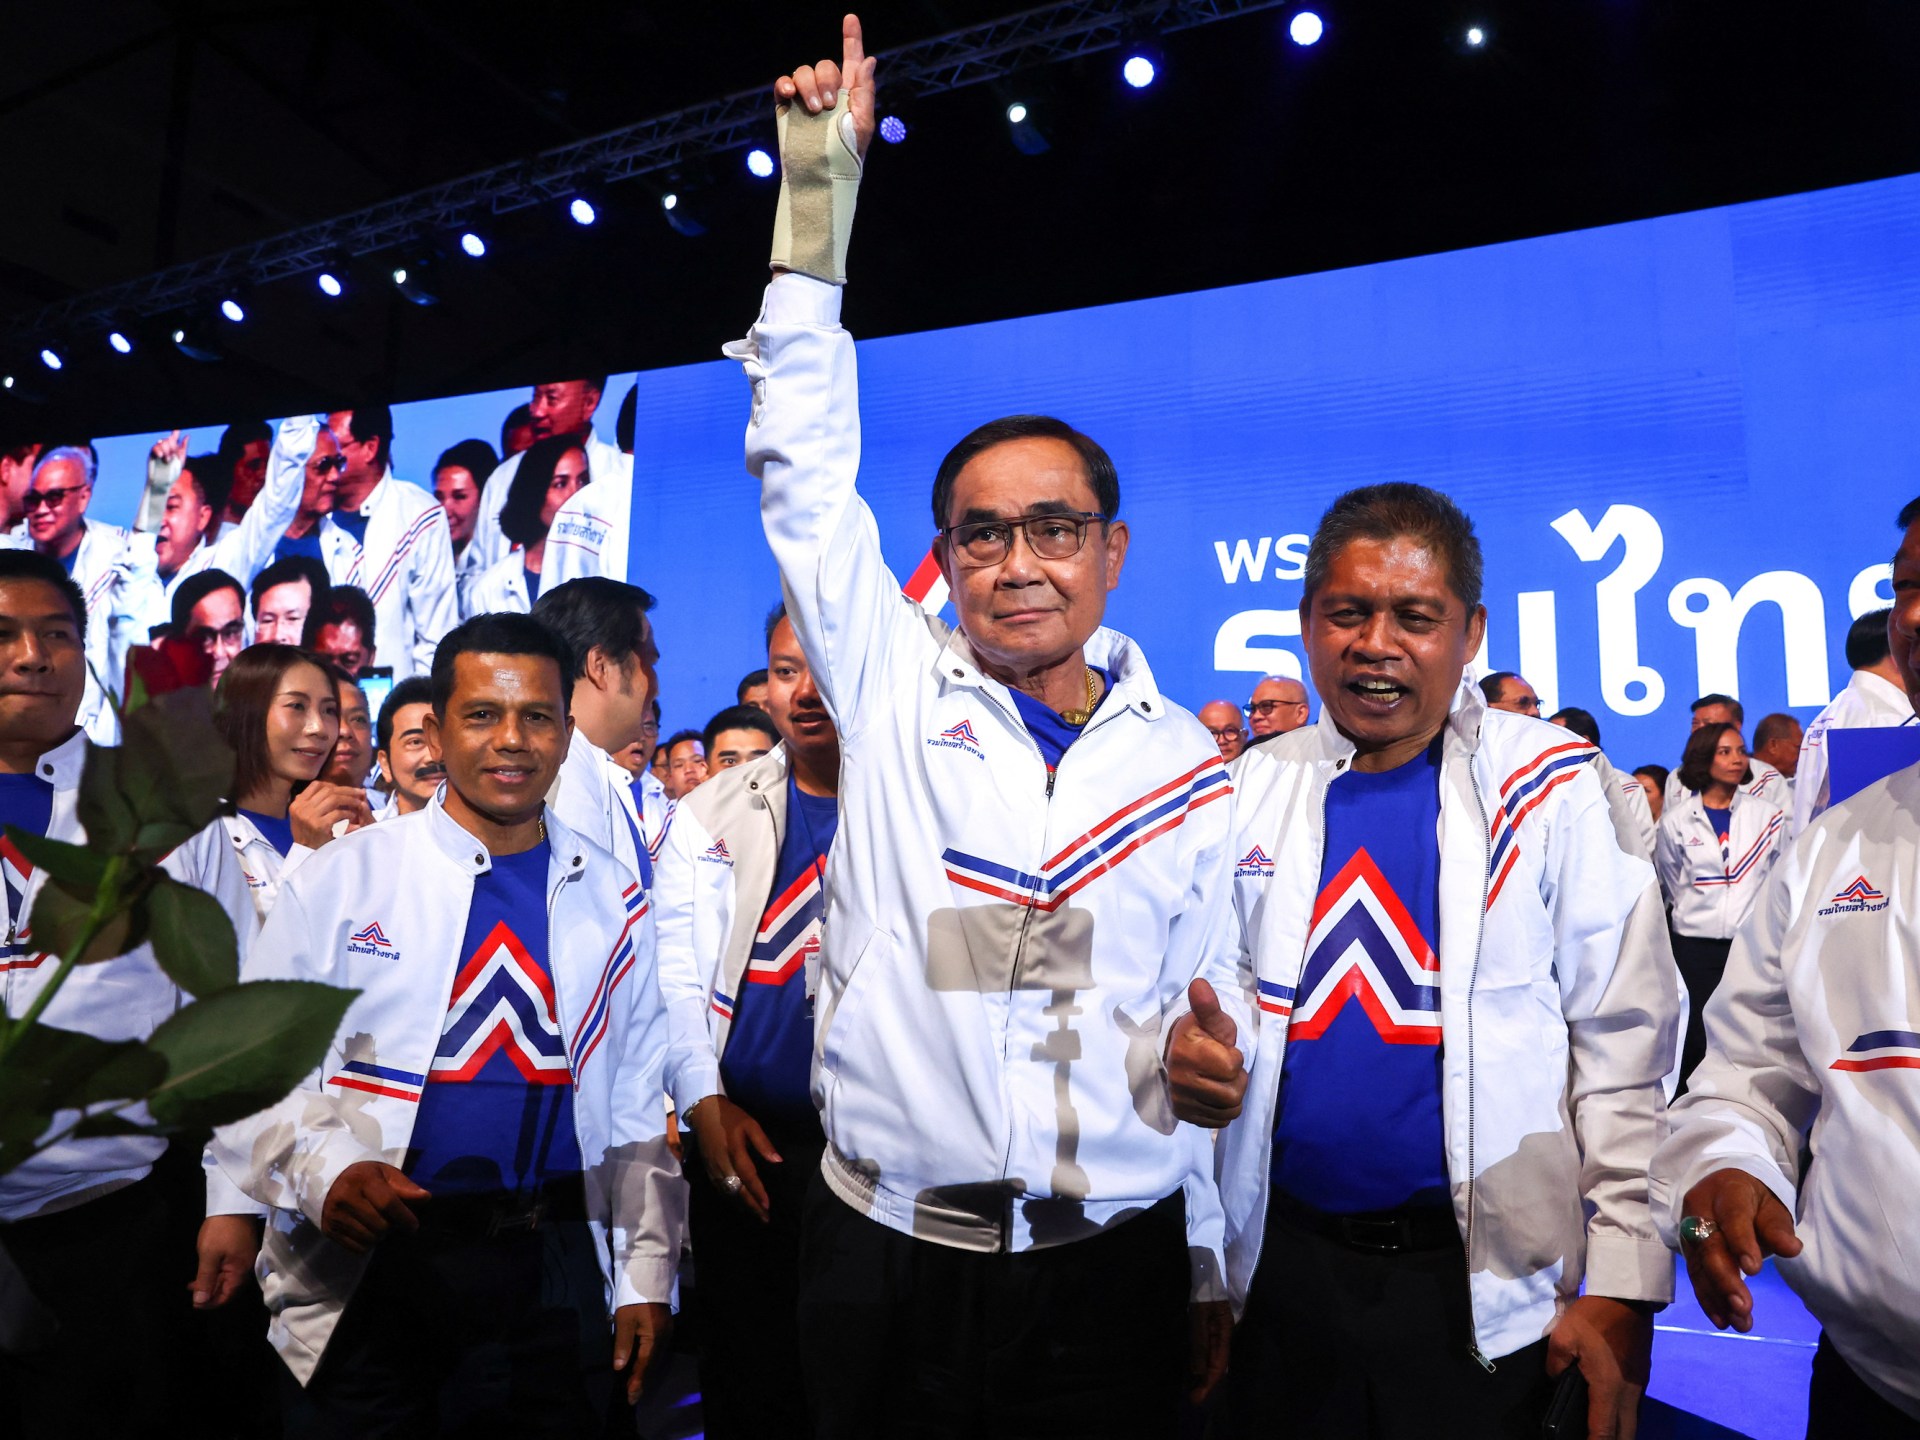 Thai PM Prayuth Chan-ocha to run for re-election | Elections News